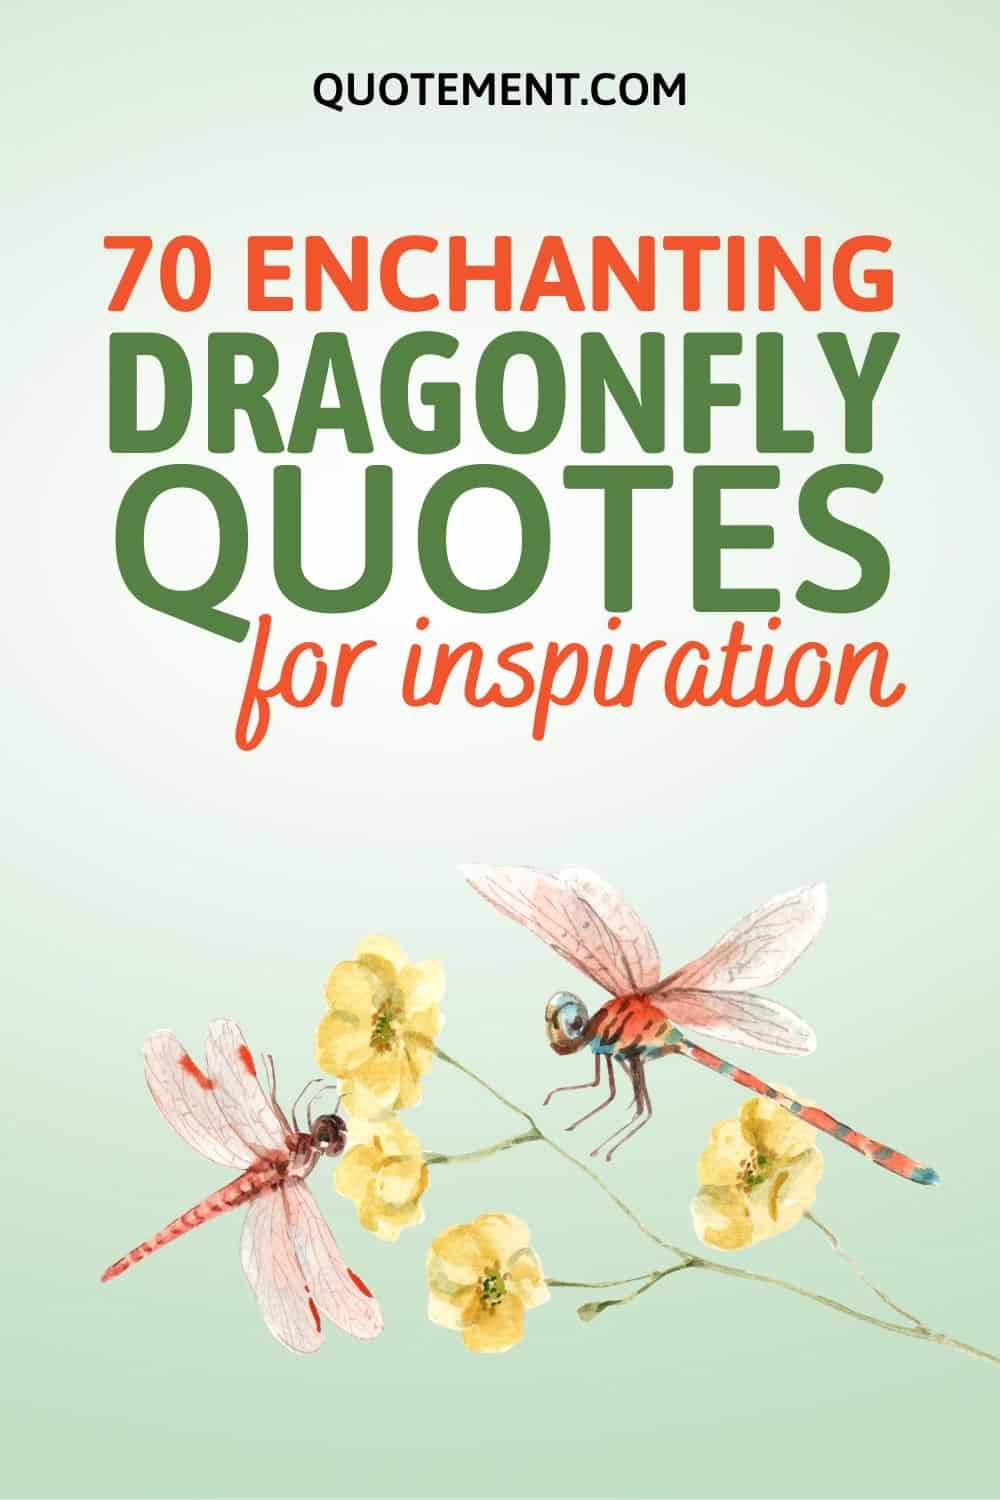 70 Enchanting Dragonfly Quotes For Wisdom And Inspiration
